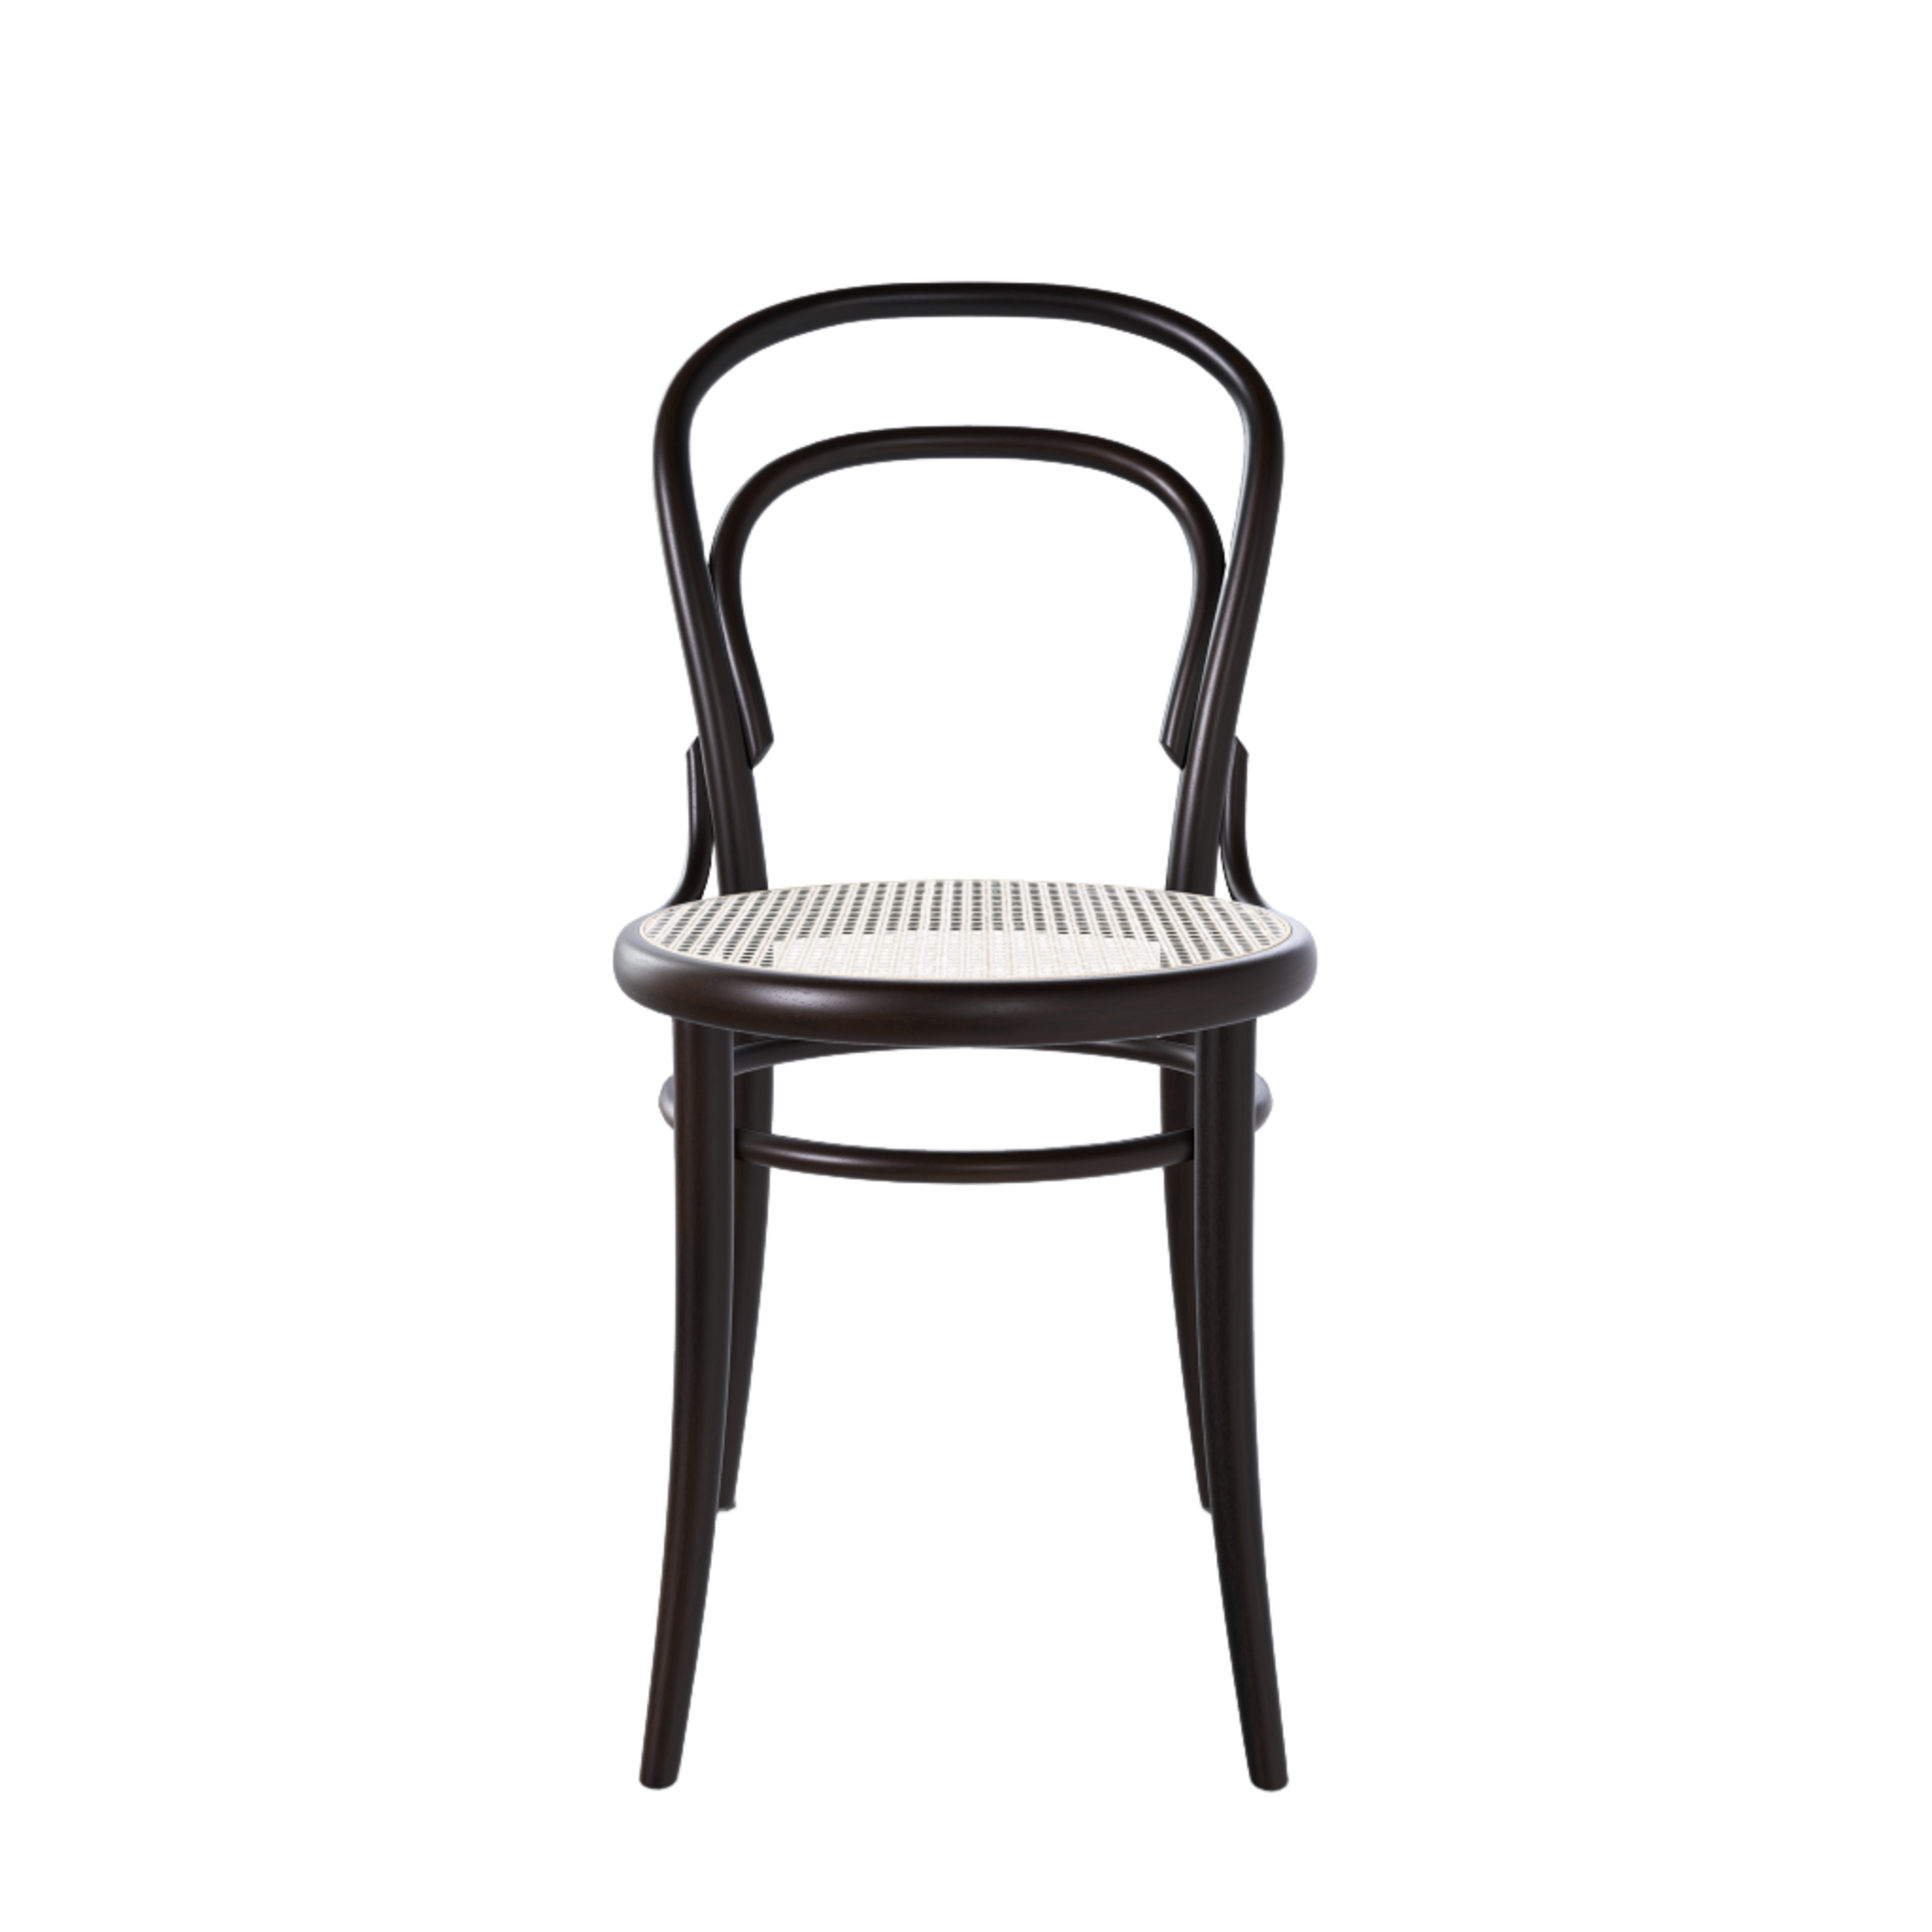 Ton 14 Dining Chair with cane seat in coffee